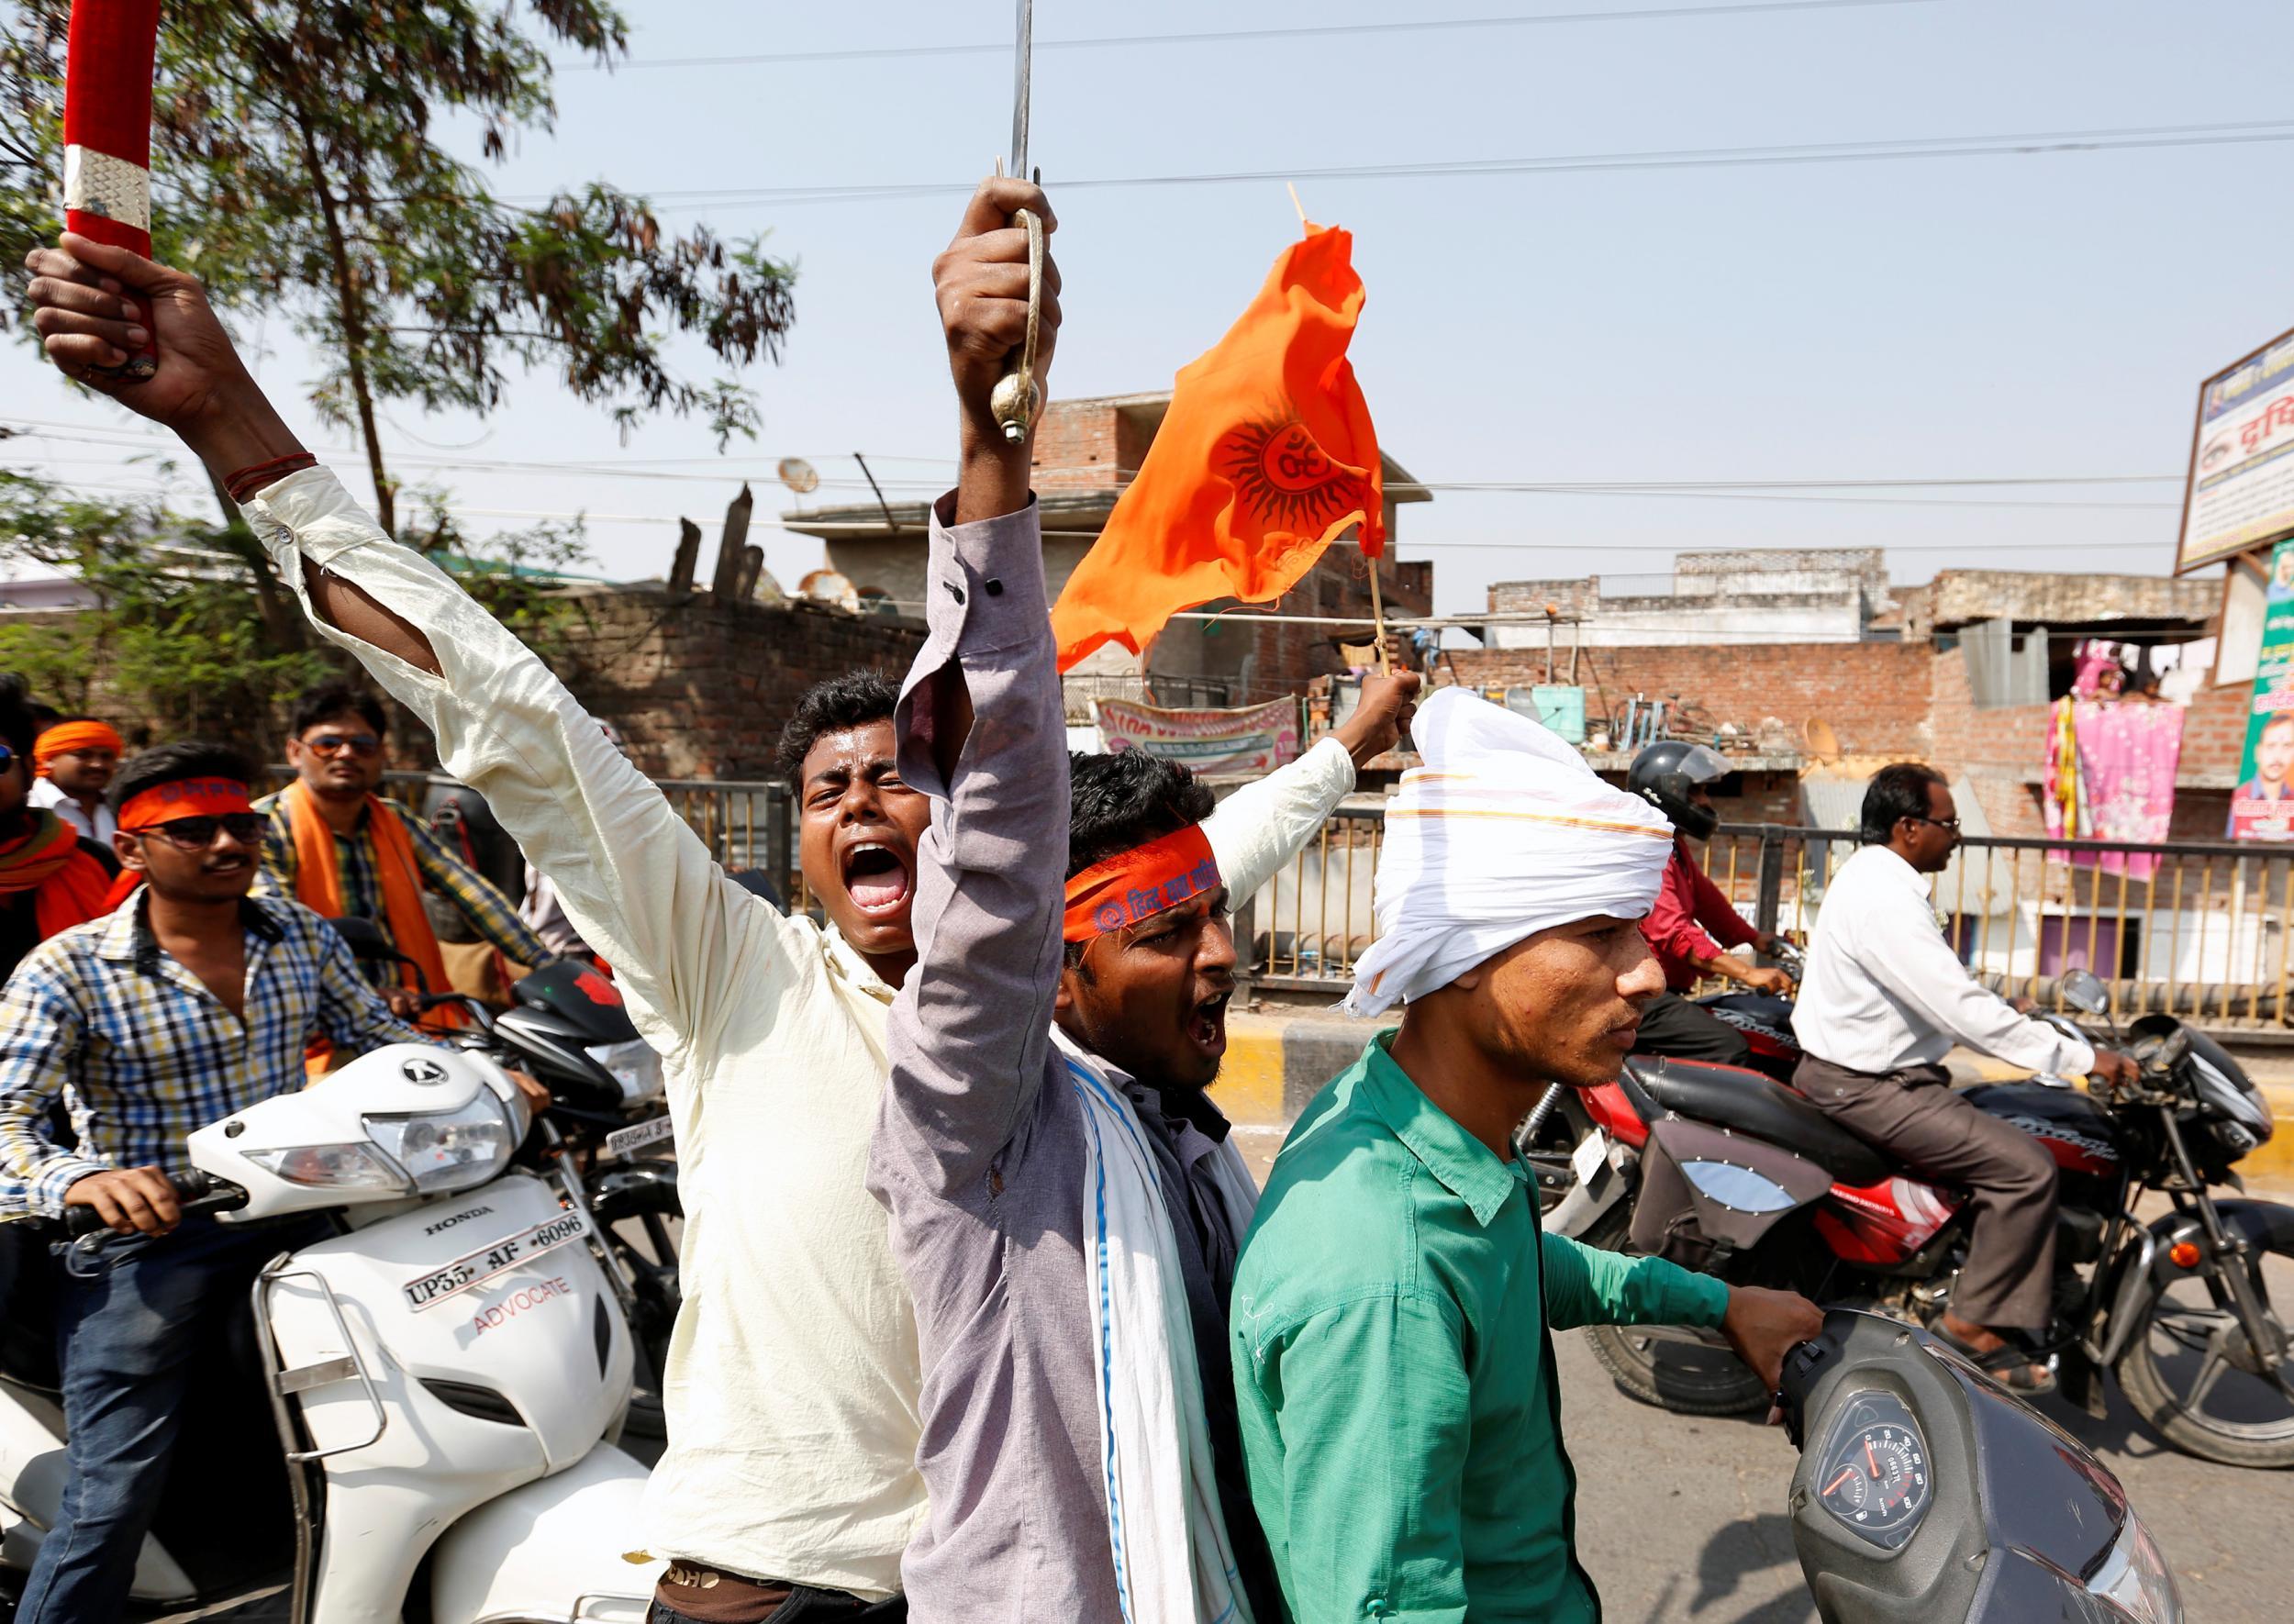 Members of the 'Hindu Yuva Vahin', or Hindu Youth Force, take part in a rally in the city of Unnao